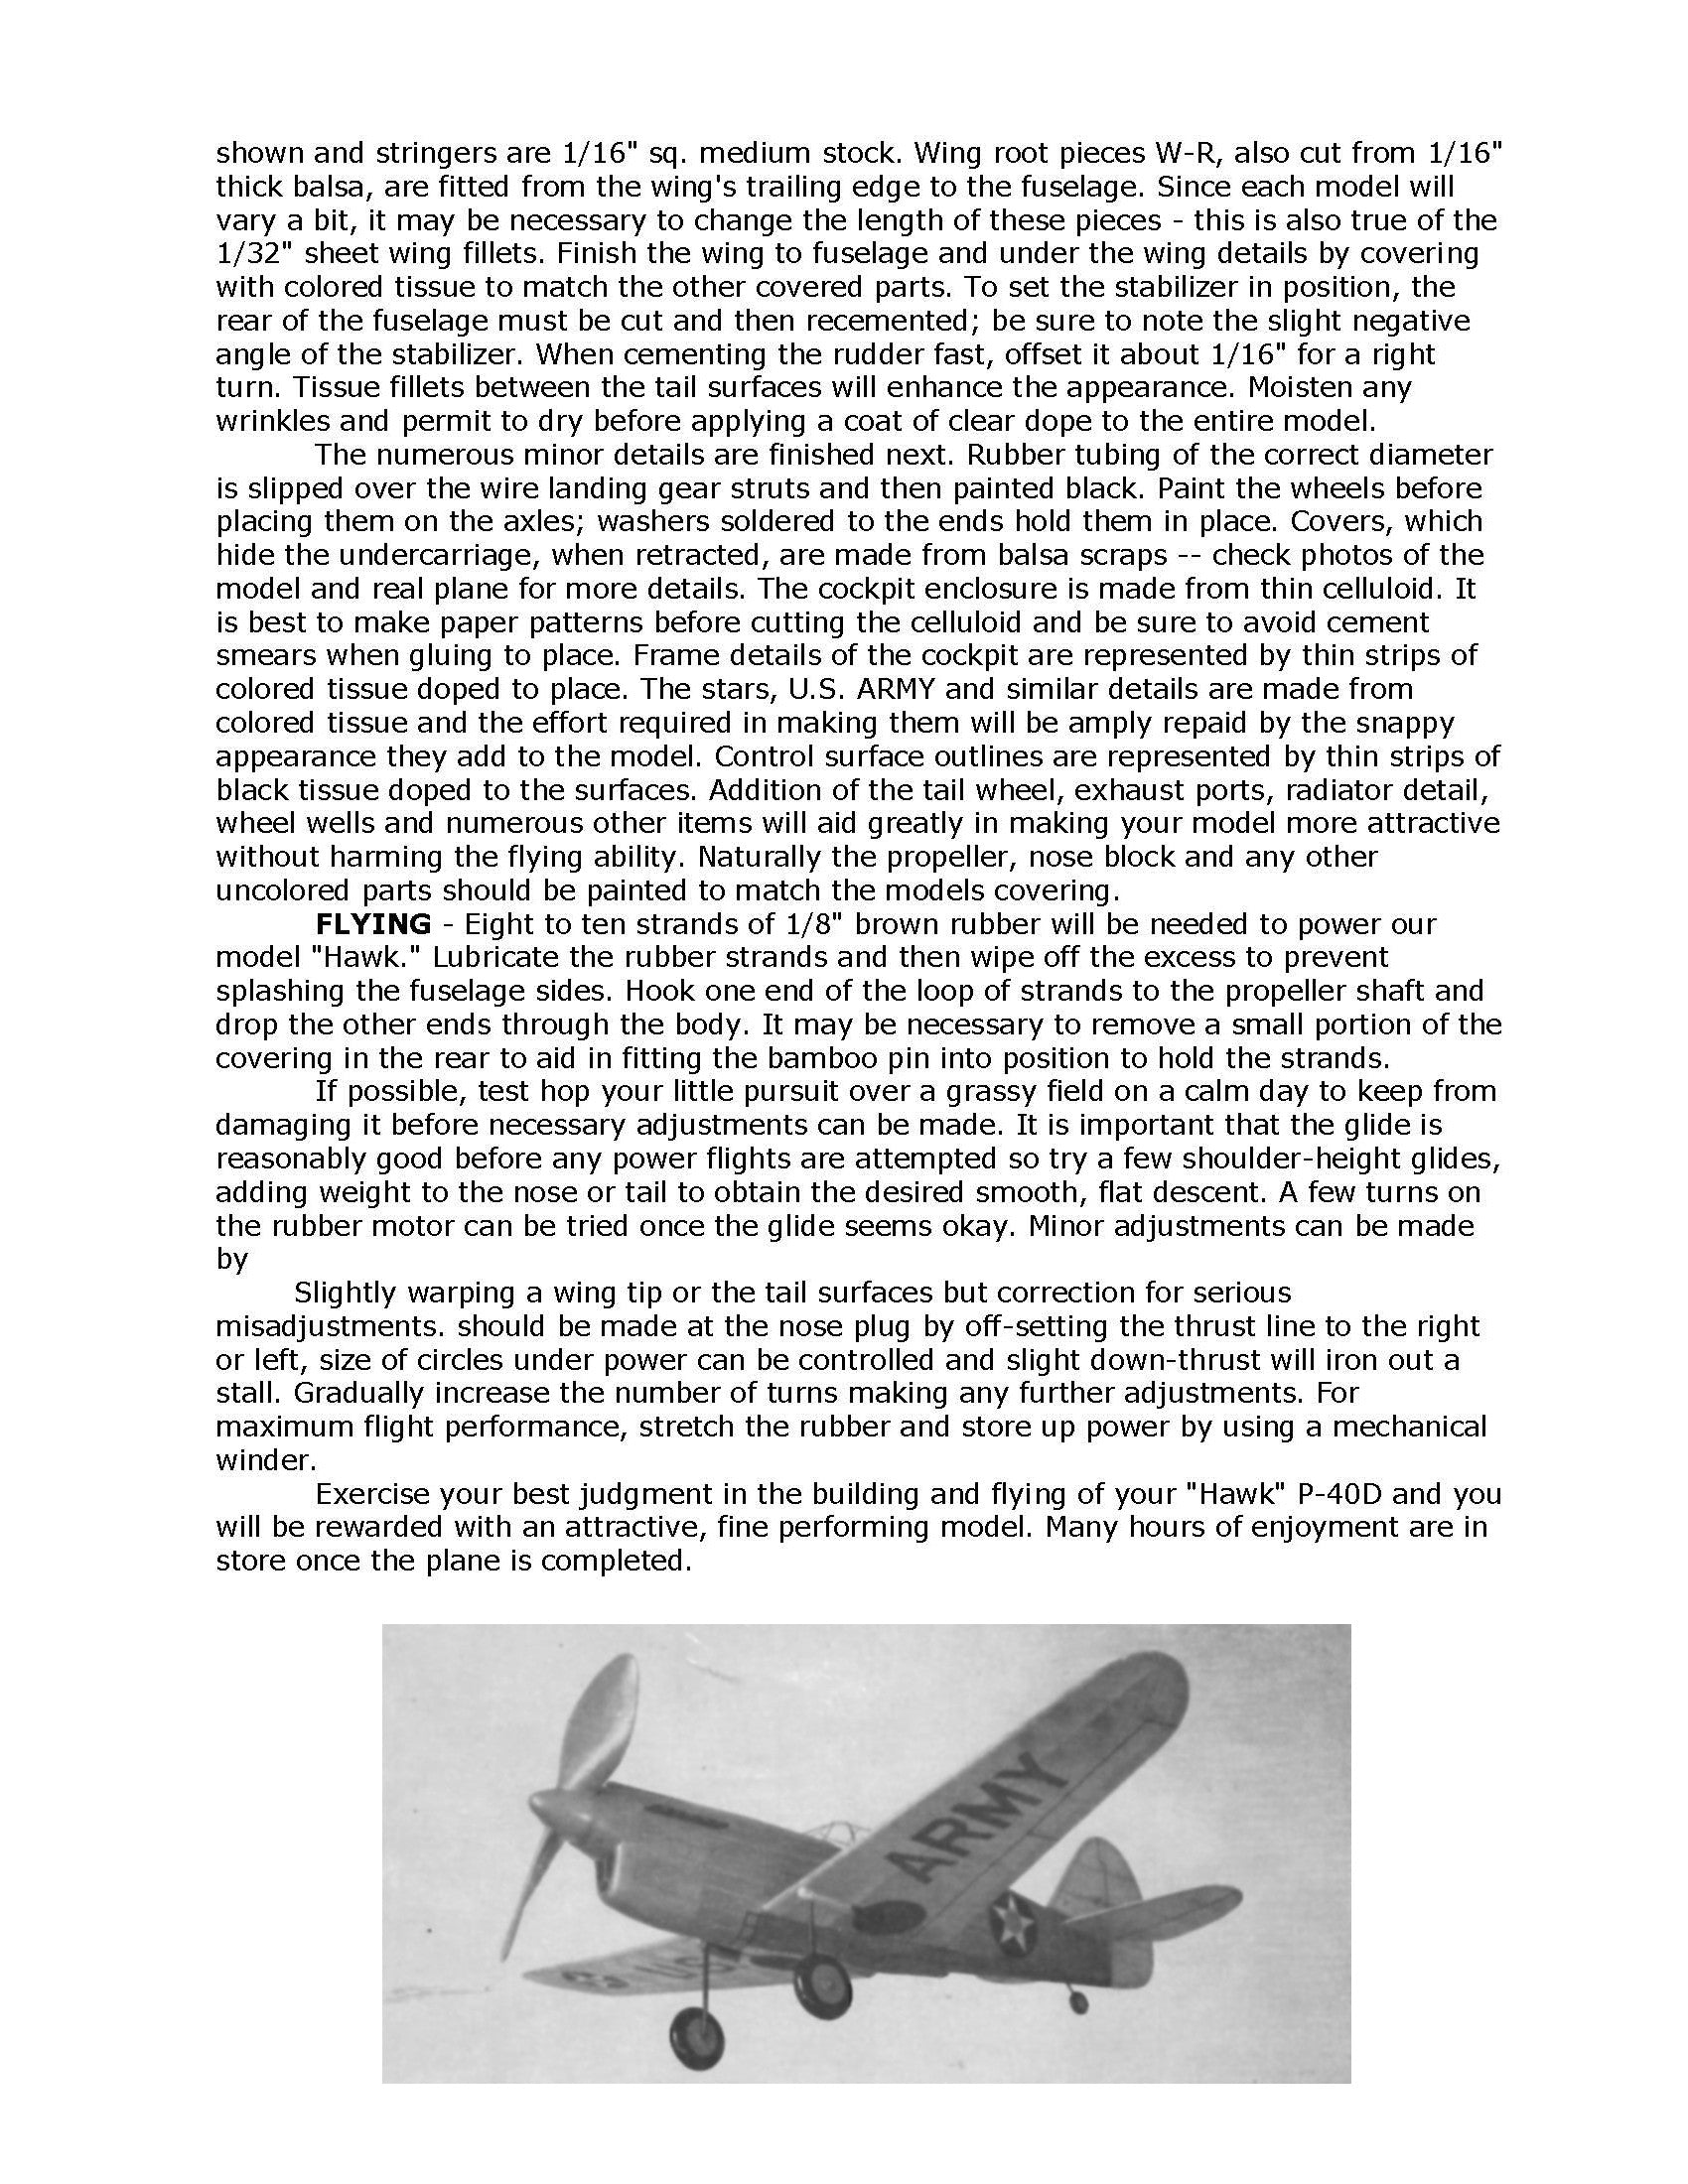 full size printed plans curtiss hawk p-40d scale 1:18  wingspan 24 ½”   power rubbe